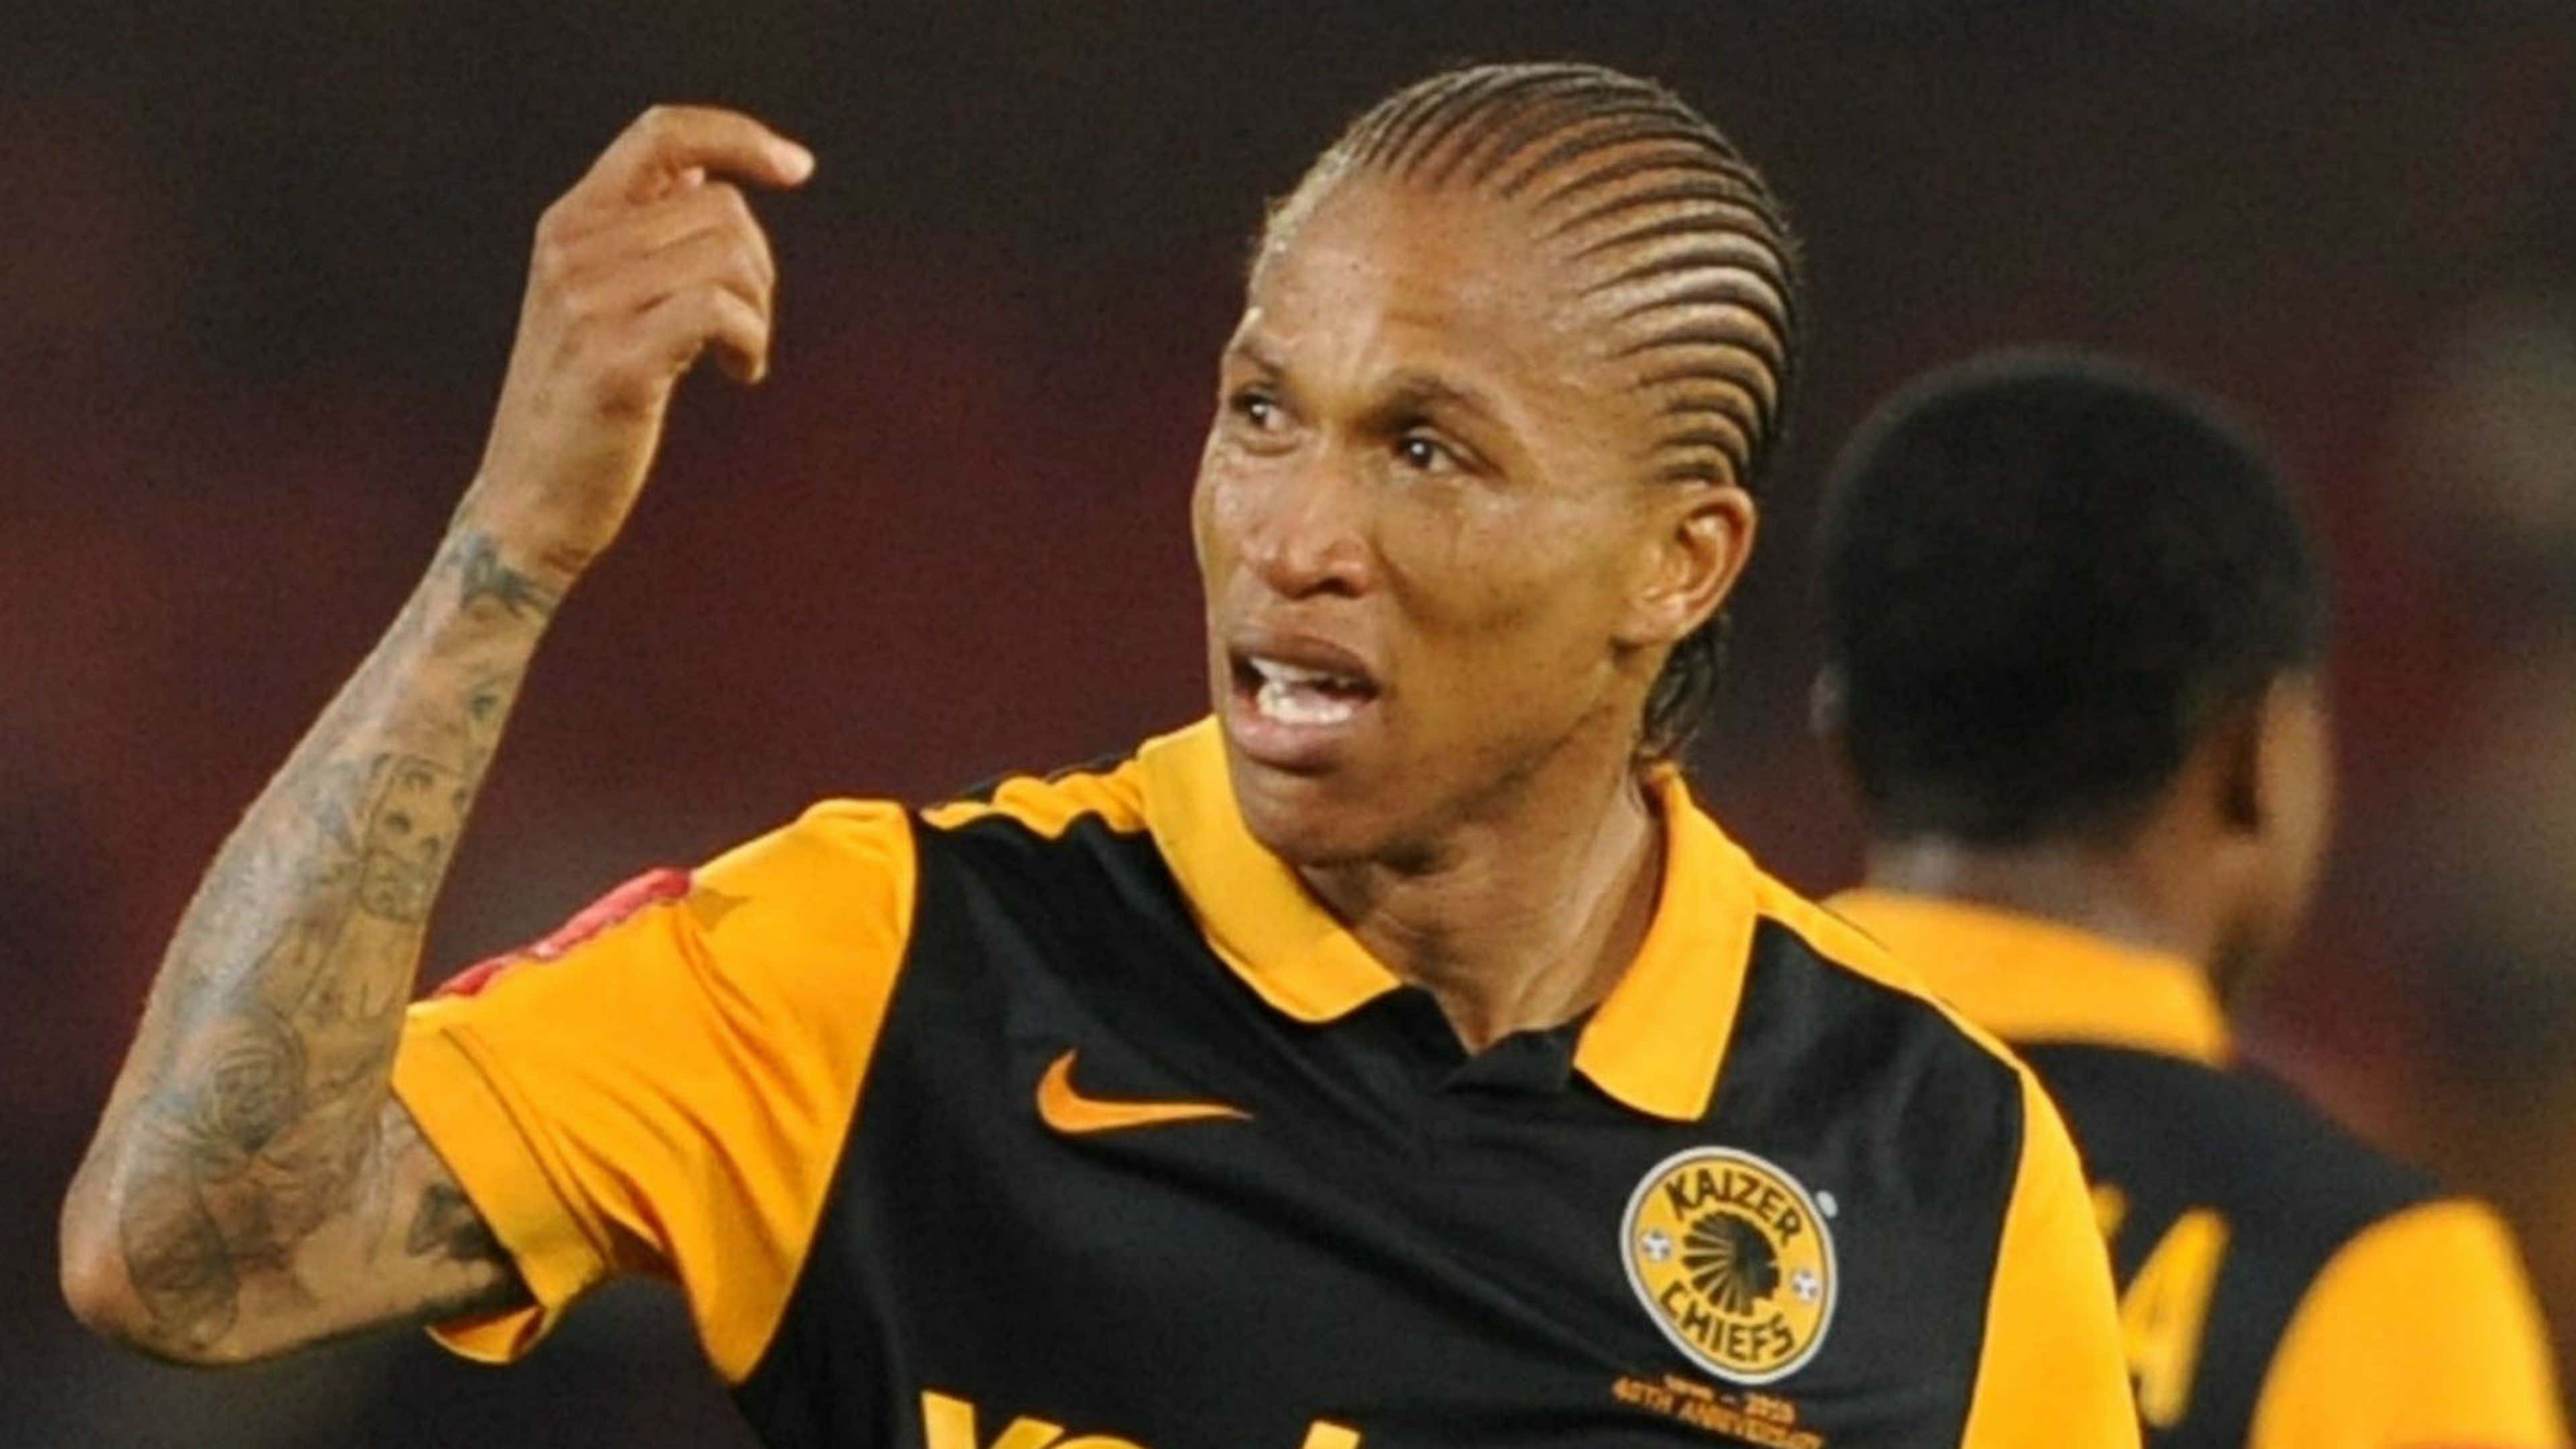 Full list: 16 players linked with Kaizer Chiefs for next season so far…